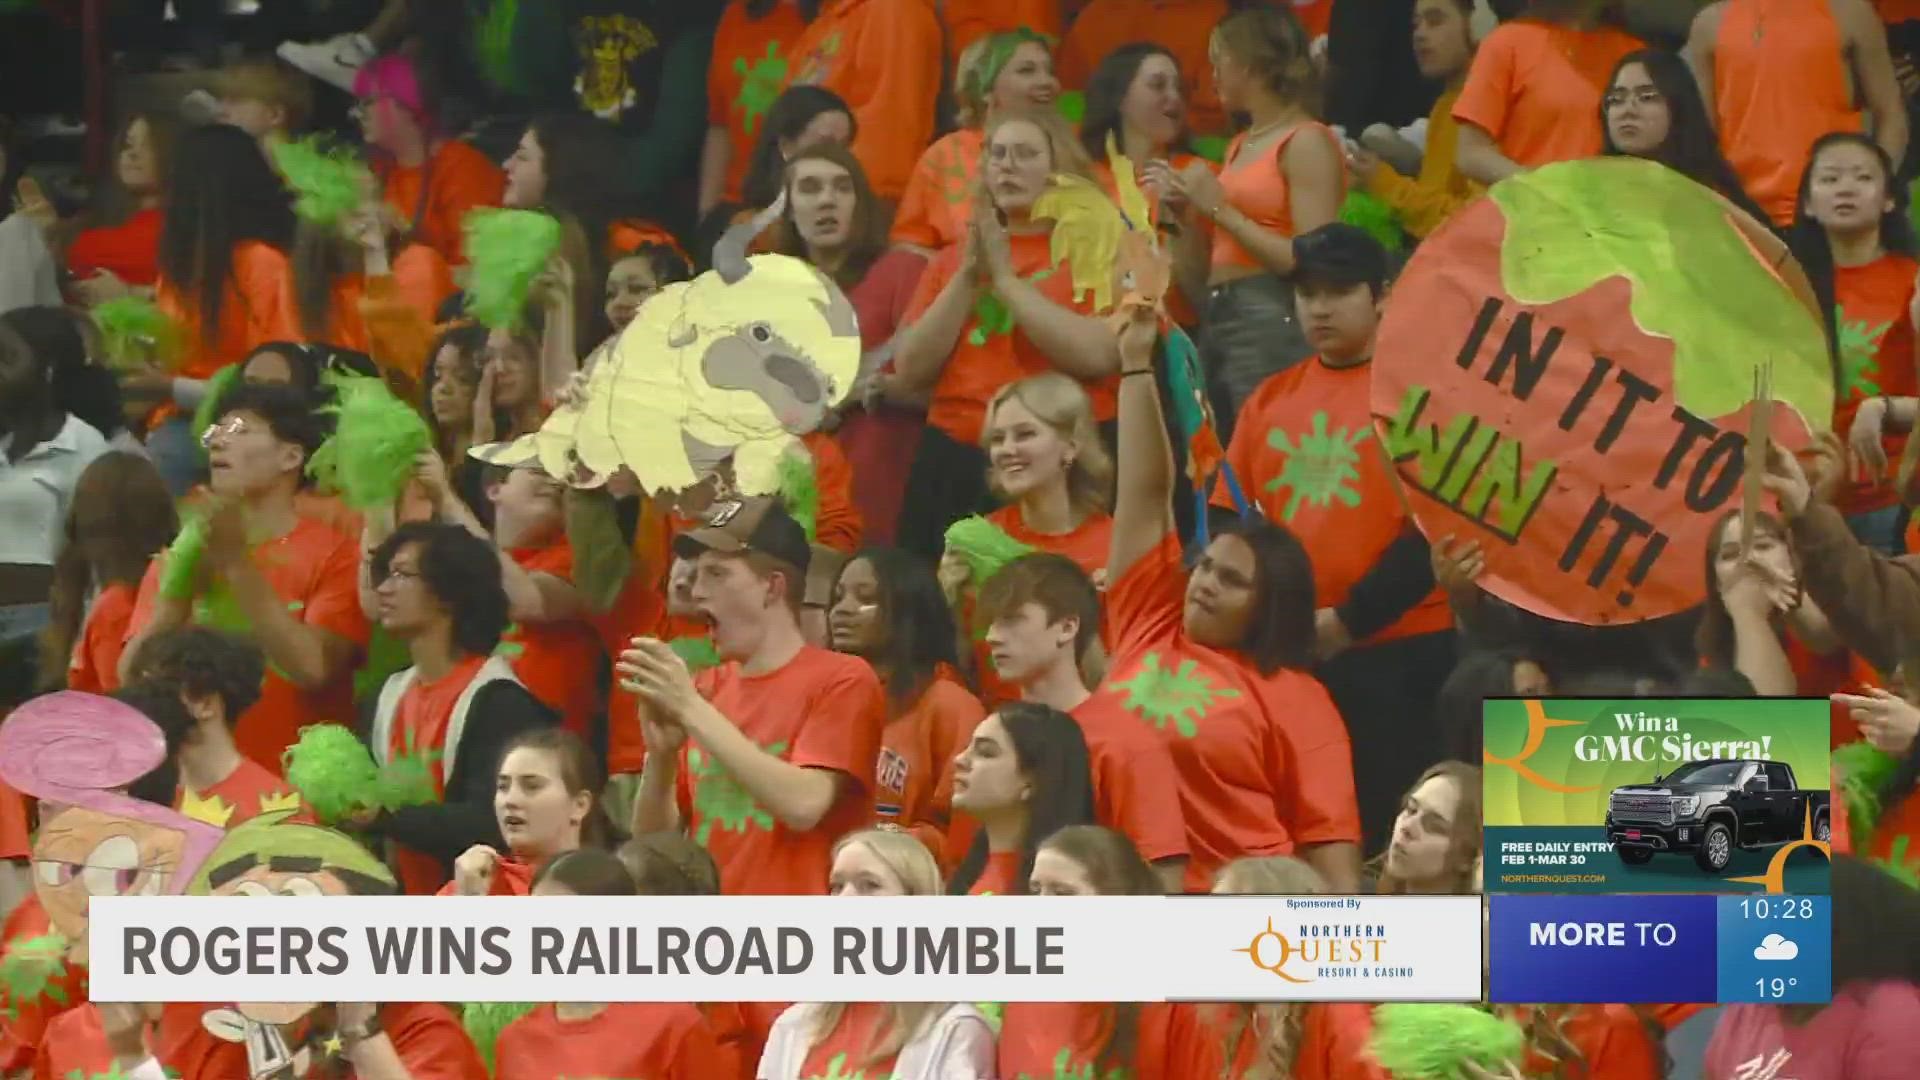 Monday night saw the first of four matchups at Spokane Arena with the newest rivalry in the "Railroad Rumble."